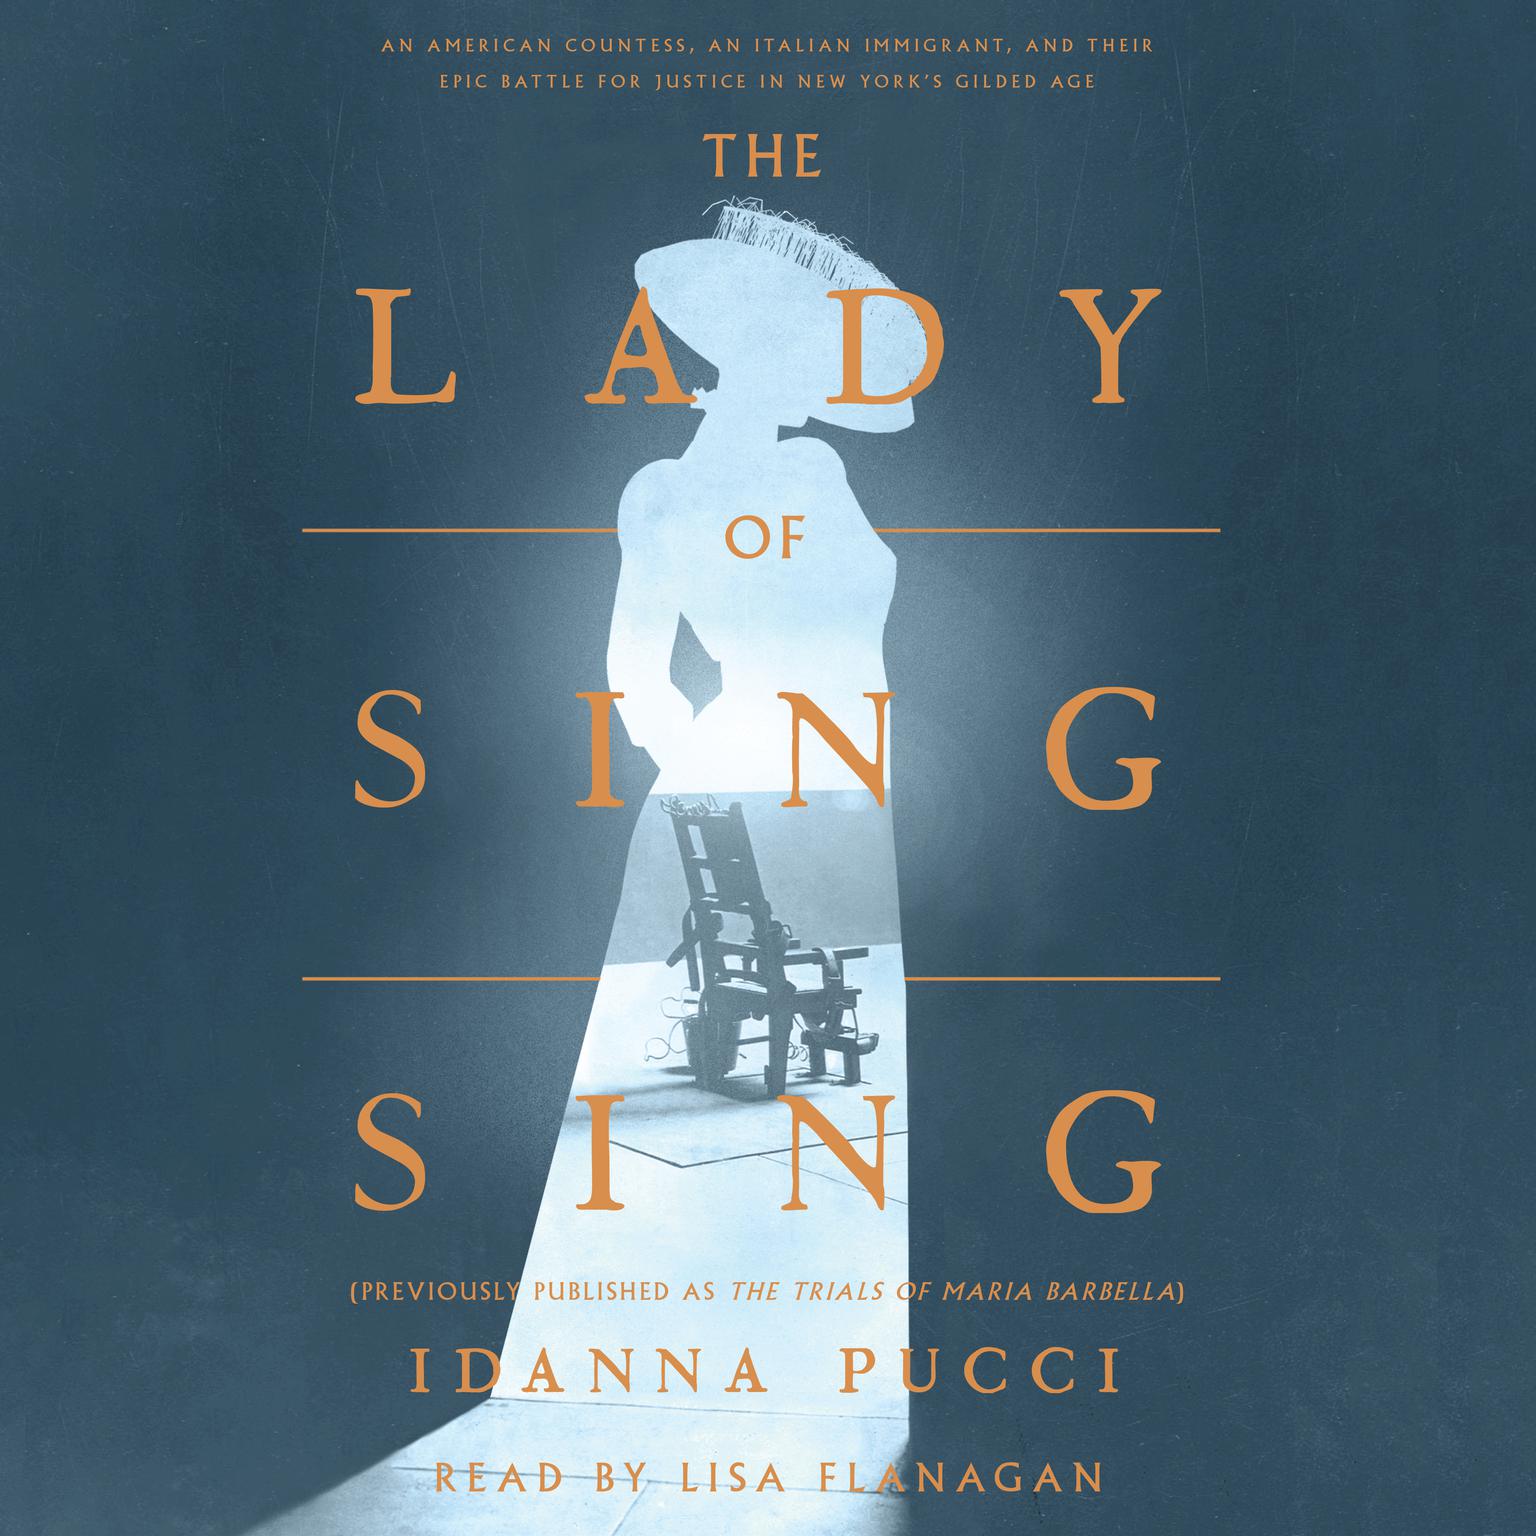 The Lady of Sing Sing: An American Countess, an Italian Immigrant, and Their Epic Battle for Justice in New Yorks Gilded Age Audiobook, by Idanna Pucci